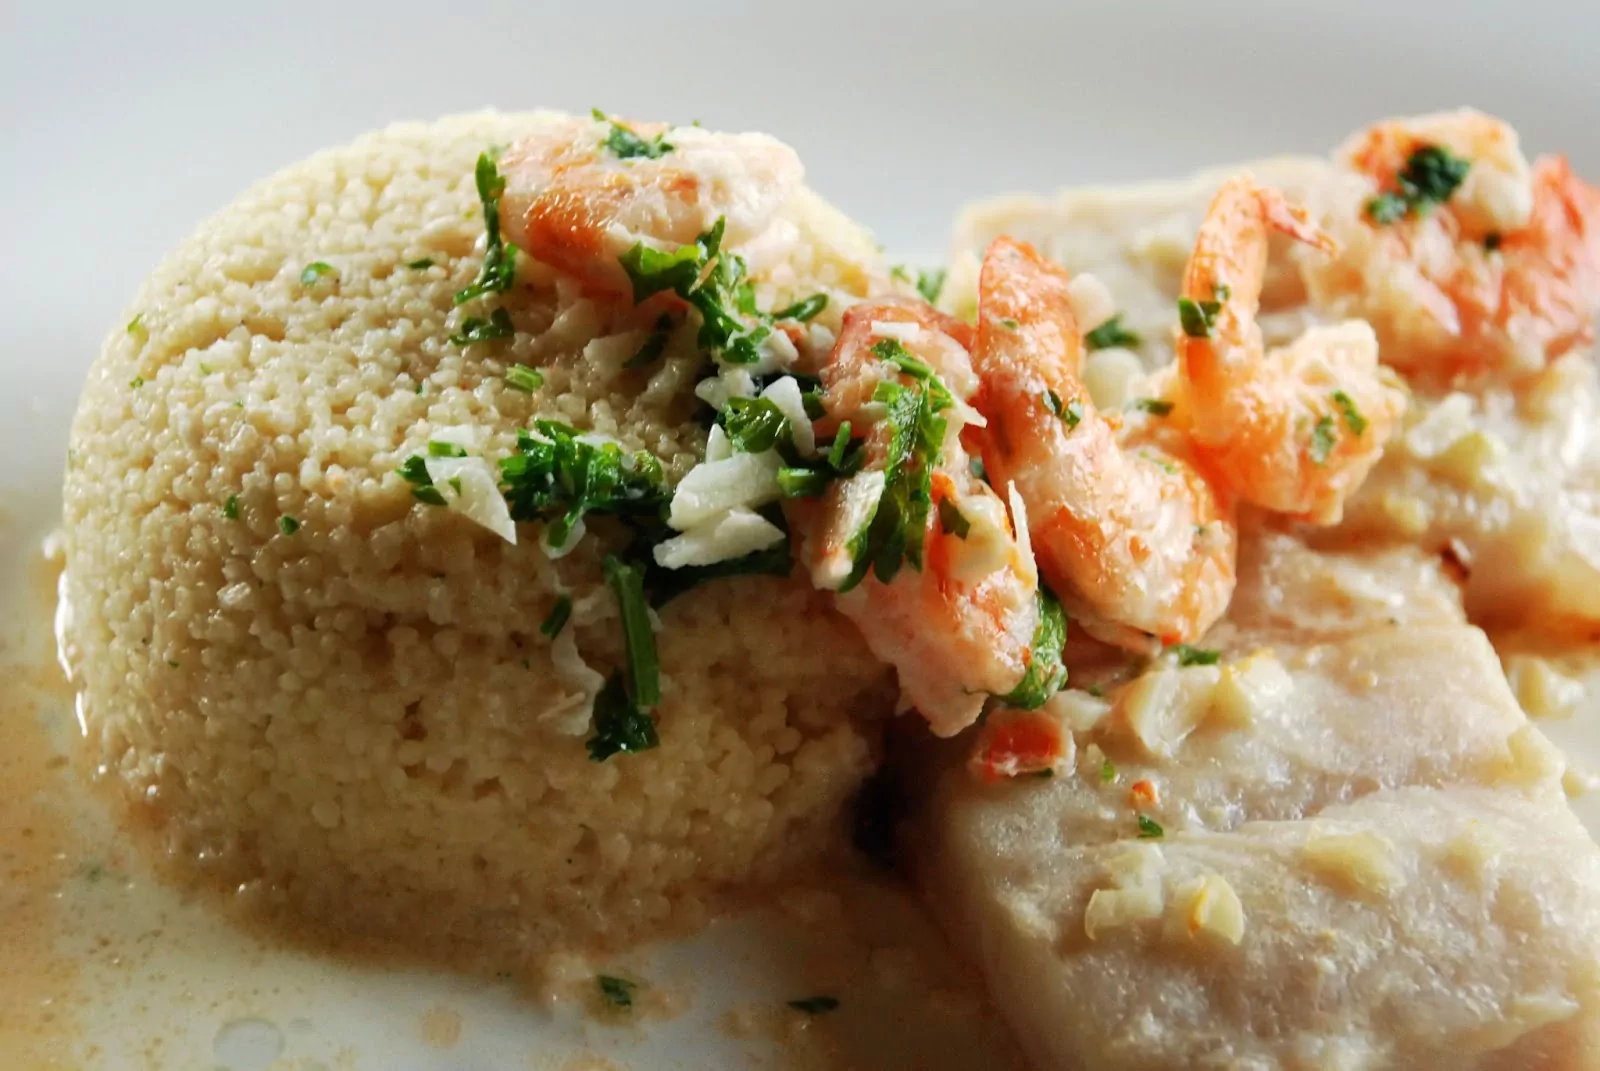 Oven-baked fish with prawn-cream sauce and couscous